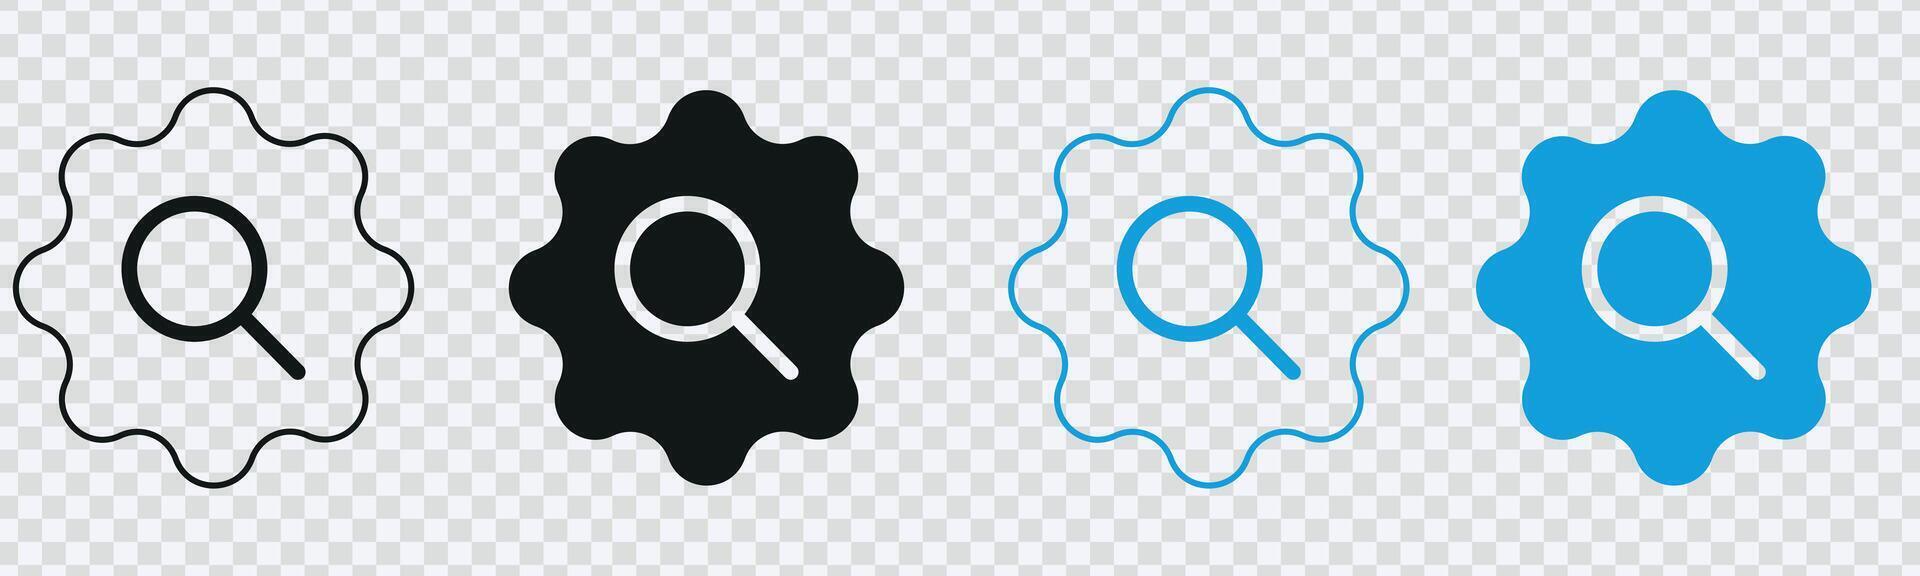 Discover with our Search Icon Button A magnifying glass loupe symbol for efficient searches vector